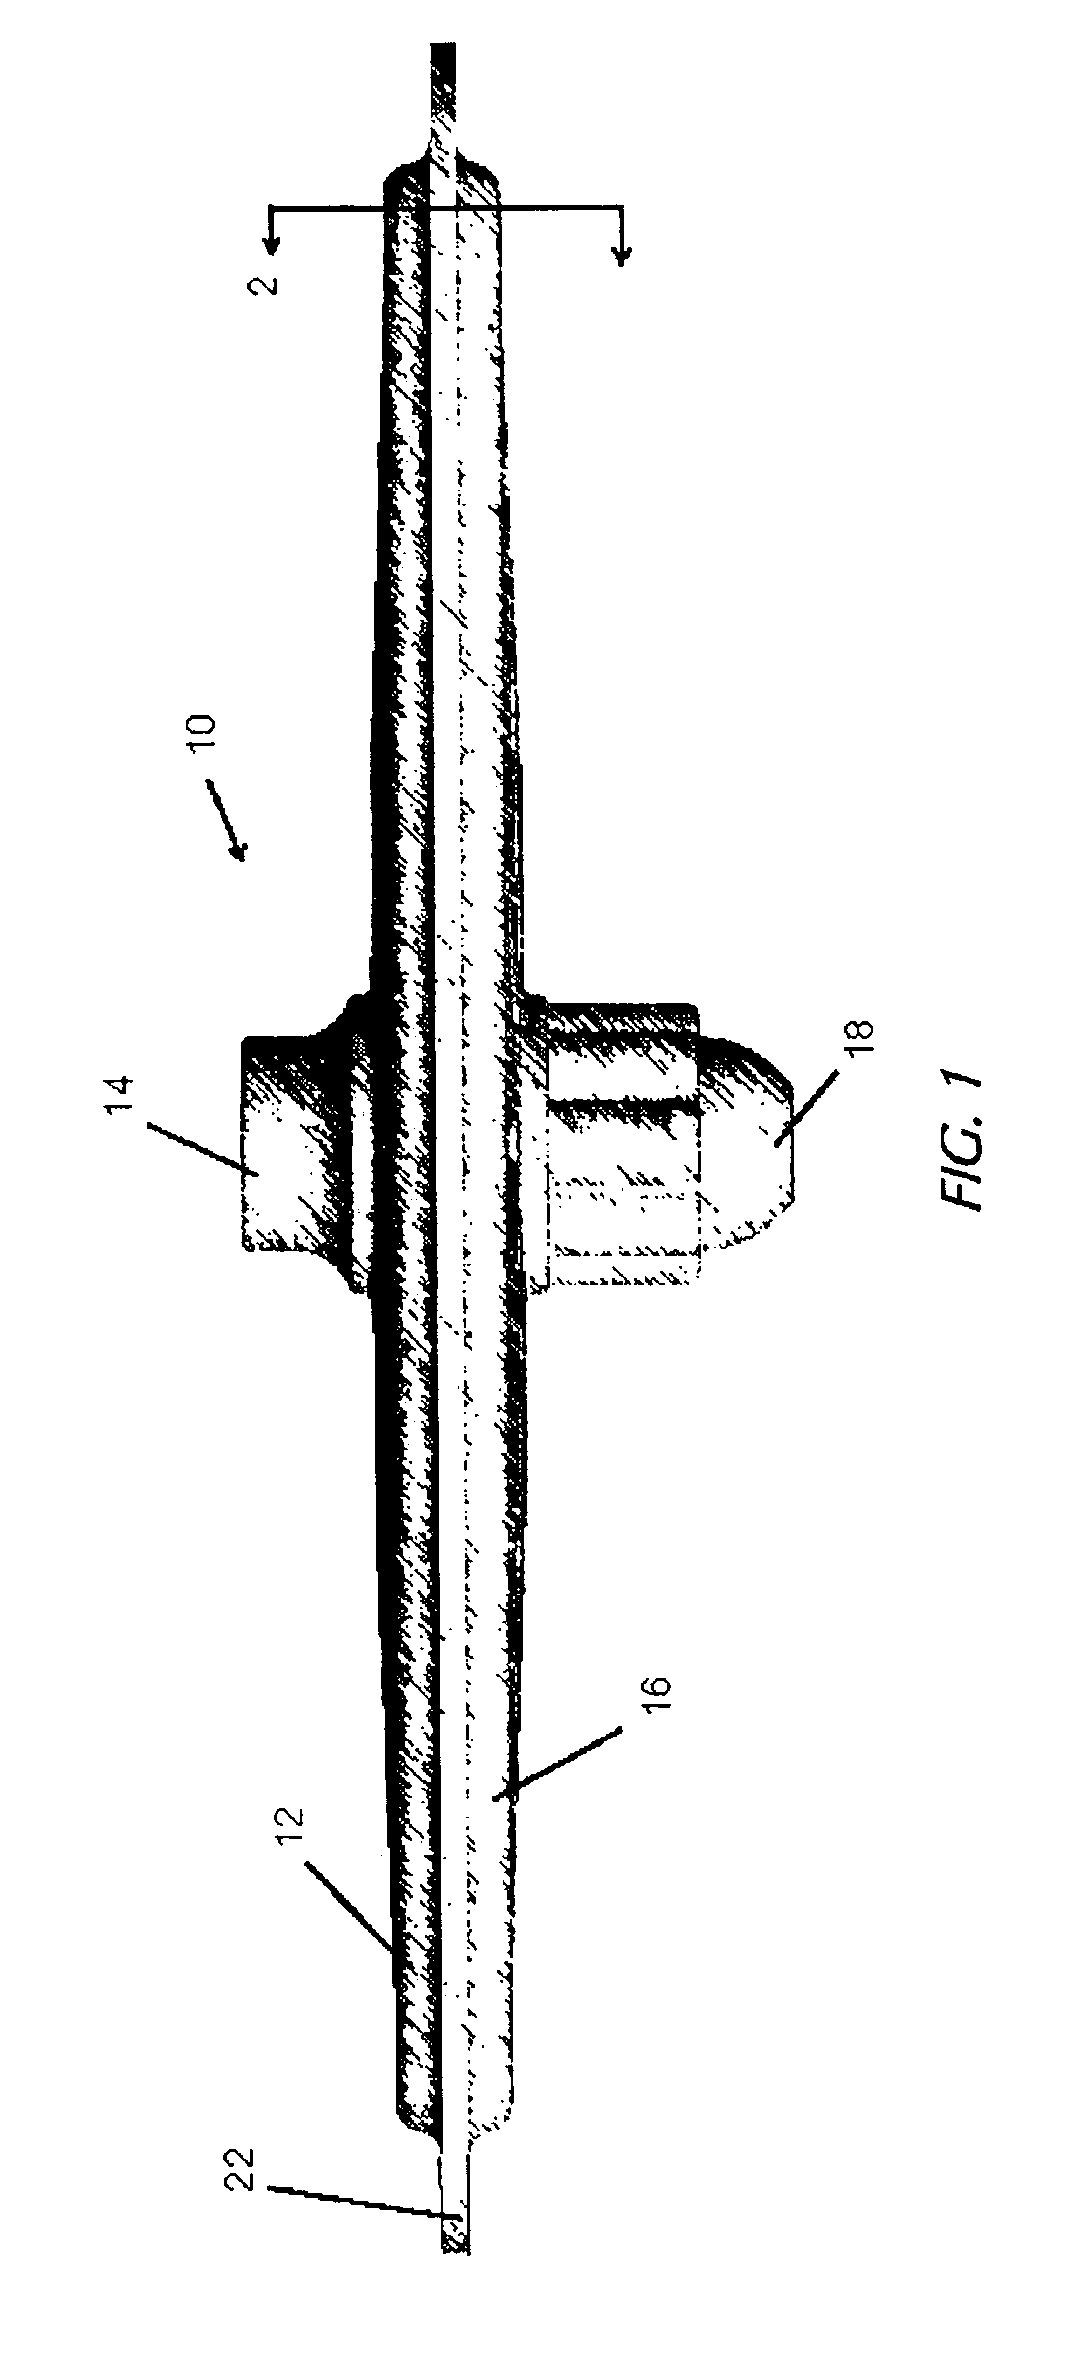 Microporous filter media, filteration systems containing same, and methods of making and using